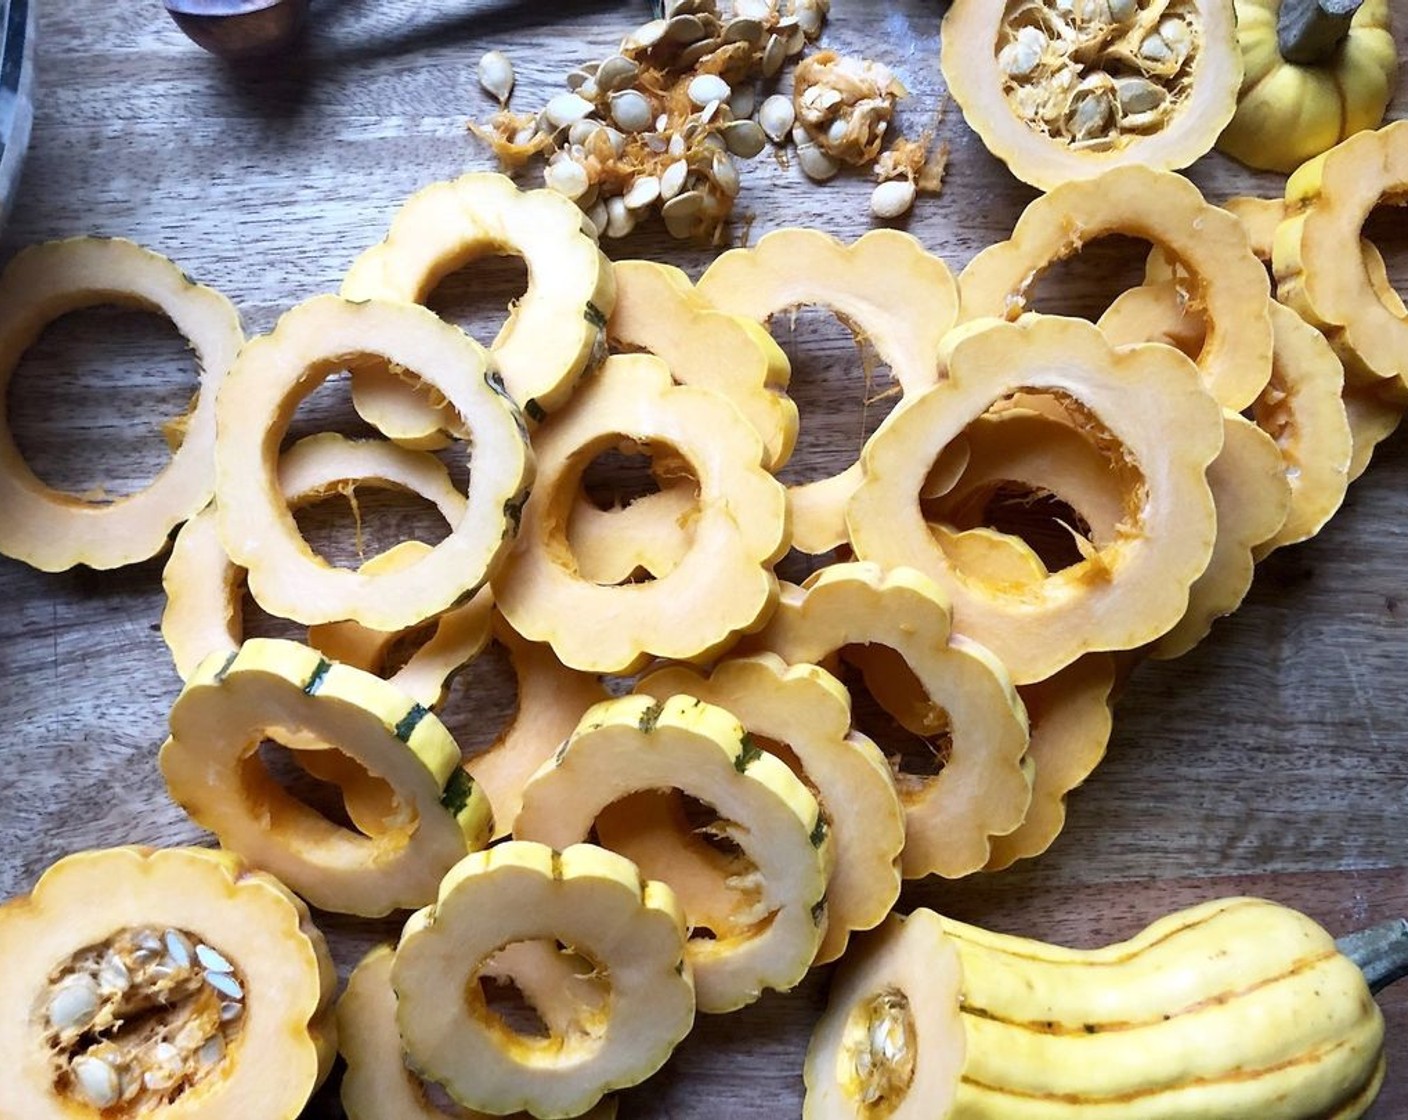 step 2 Slice the Delicata Squash (2) in rings about 1/4 inch thick. Remove the seeds and loose fiber.